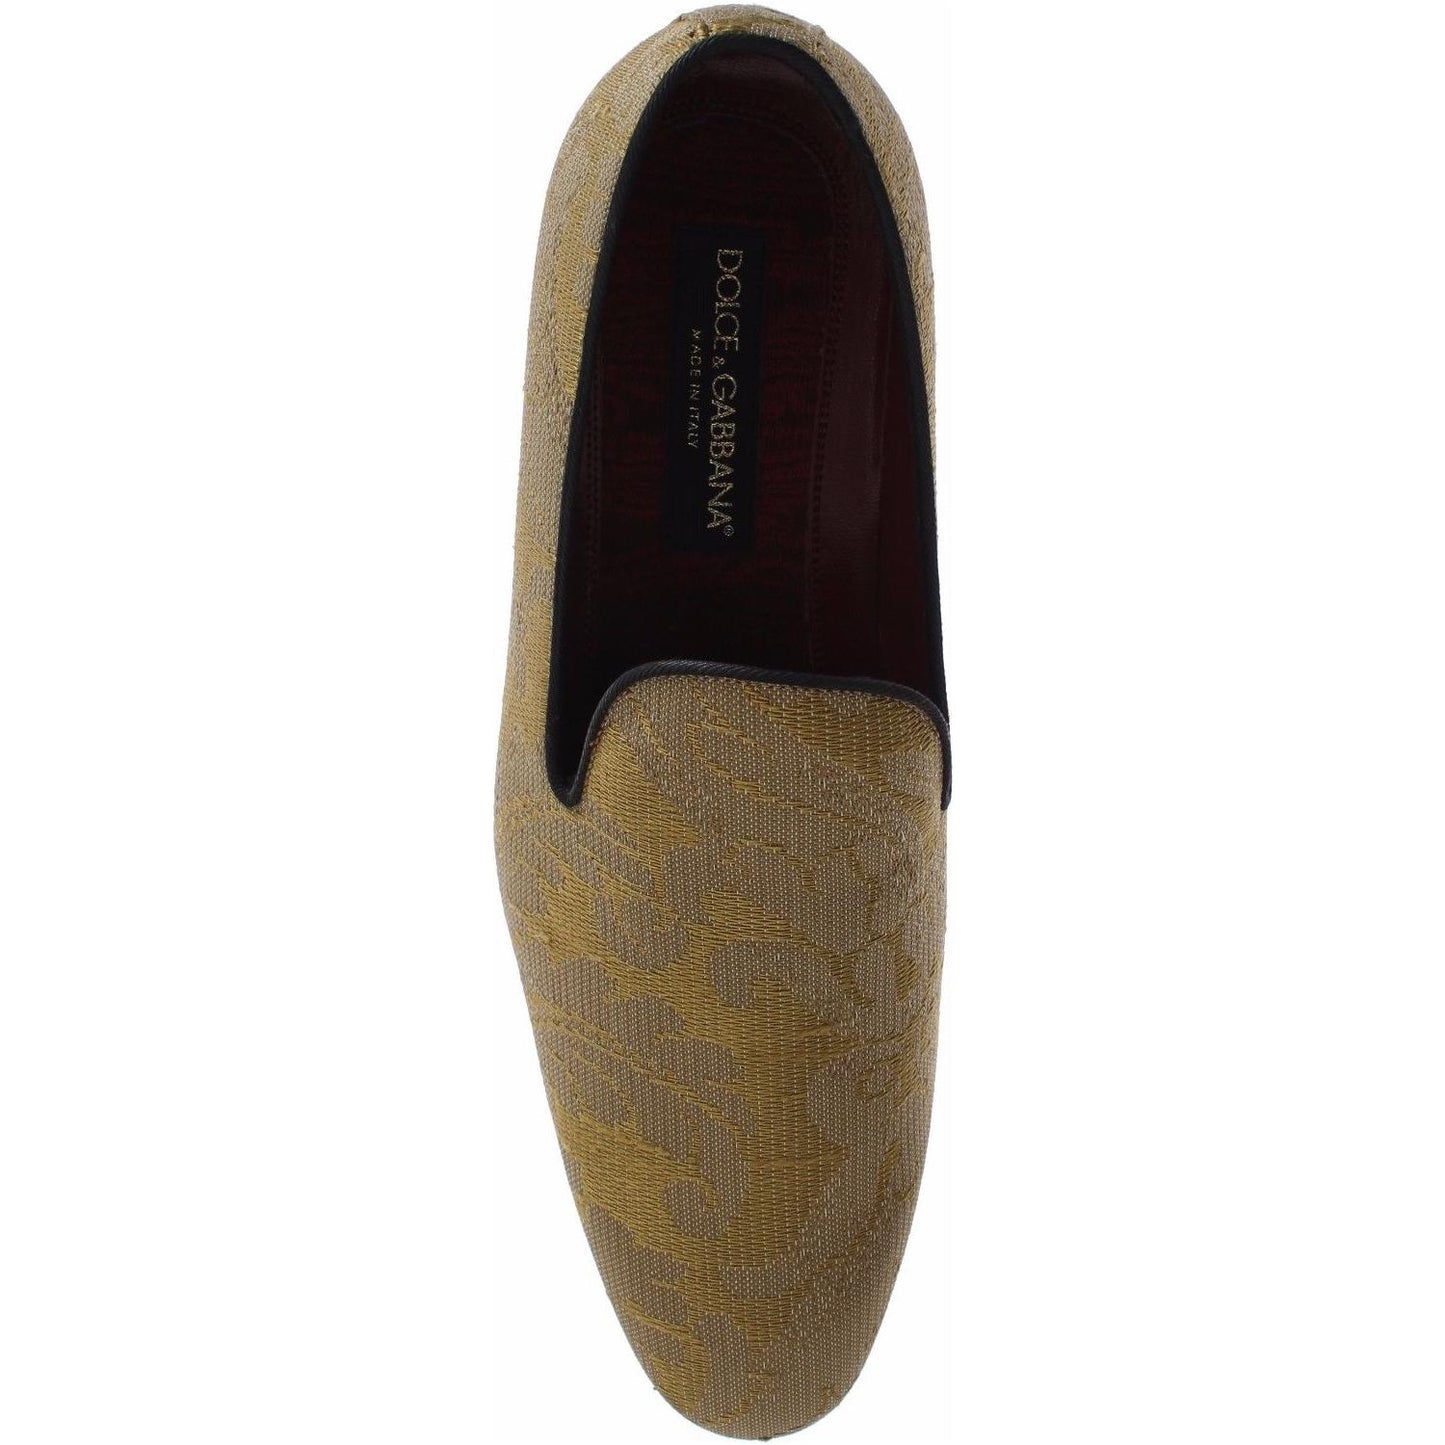 Dolce & Gabbana Golden Baroque Silk Dress Loafers yellow-gold-silk-baroque-loafers-shoes